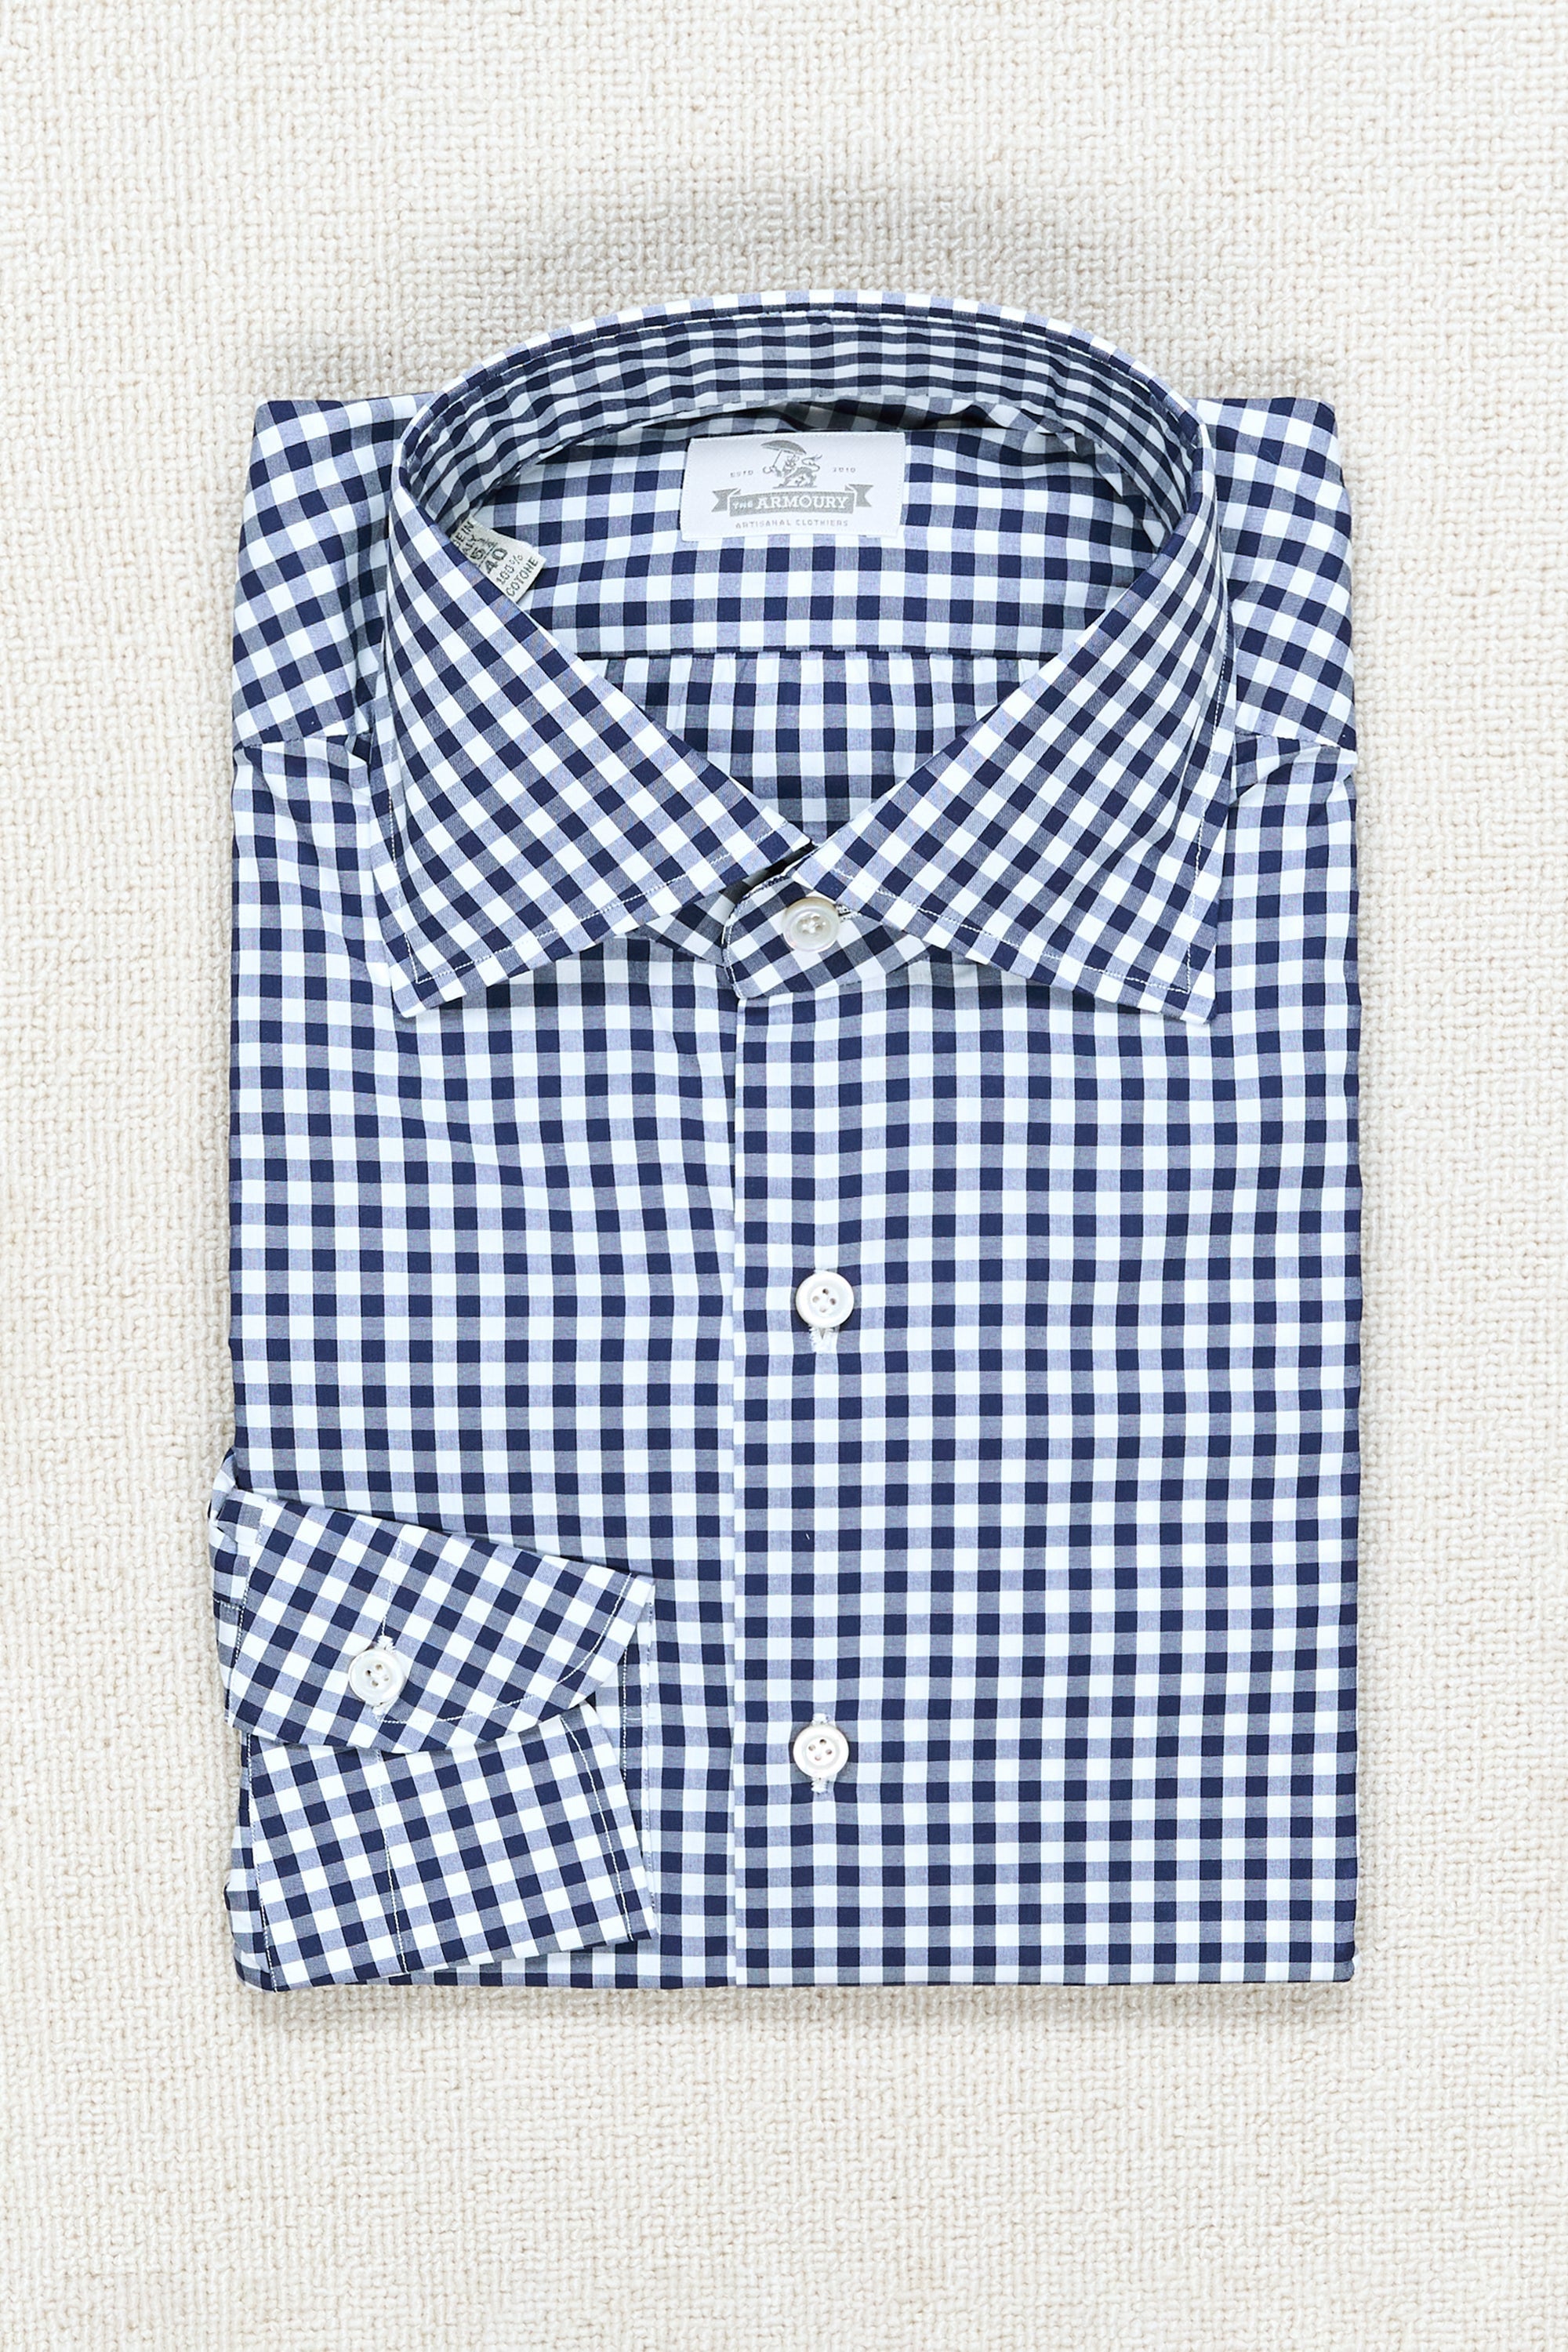 The Armoury Navy with White Gingham Cotton Spread Collar Shirt